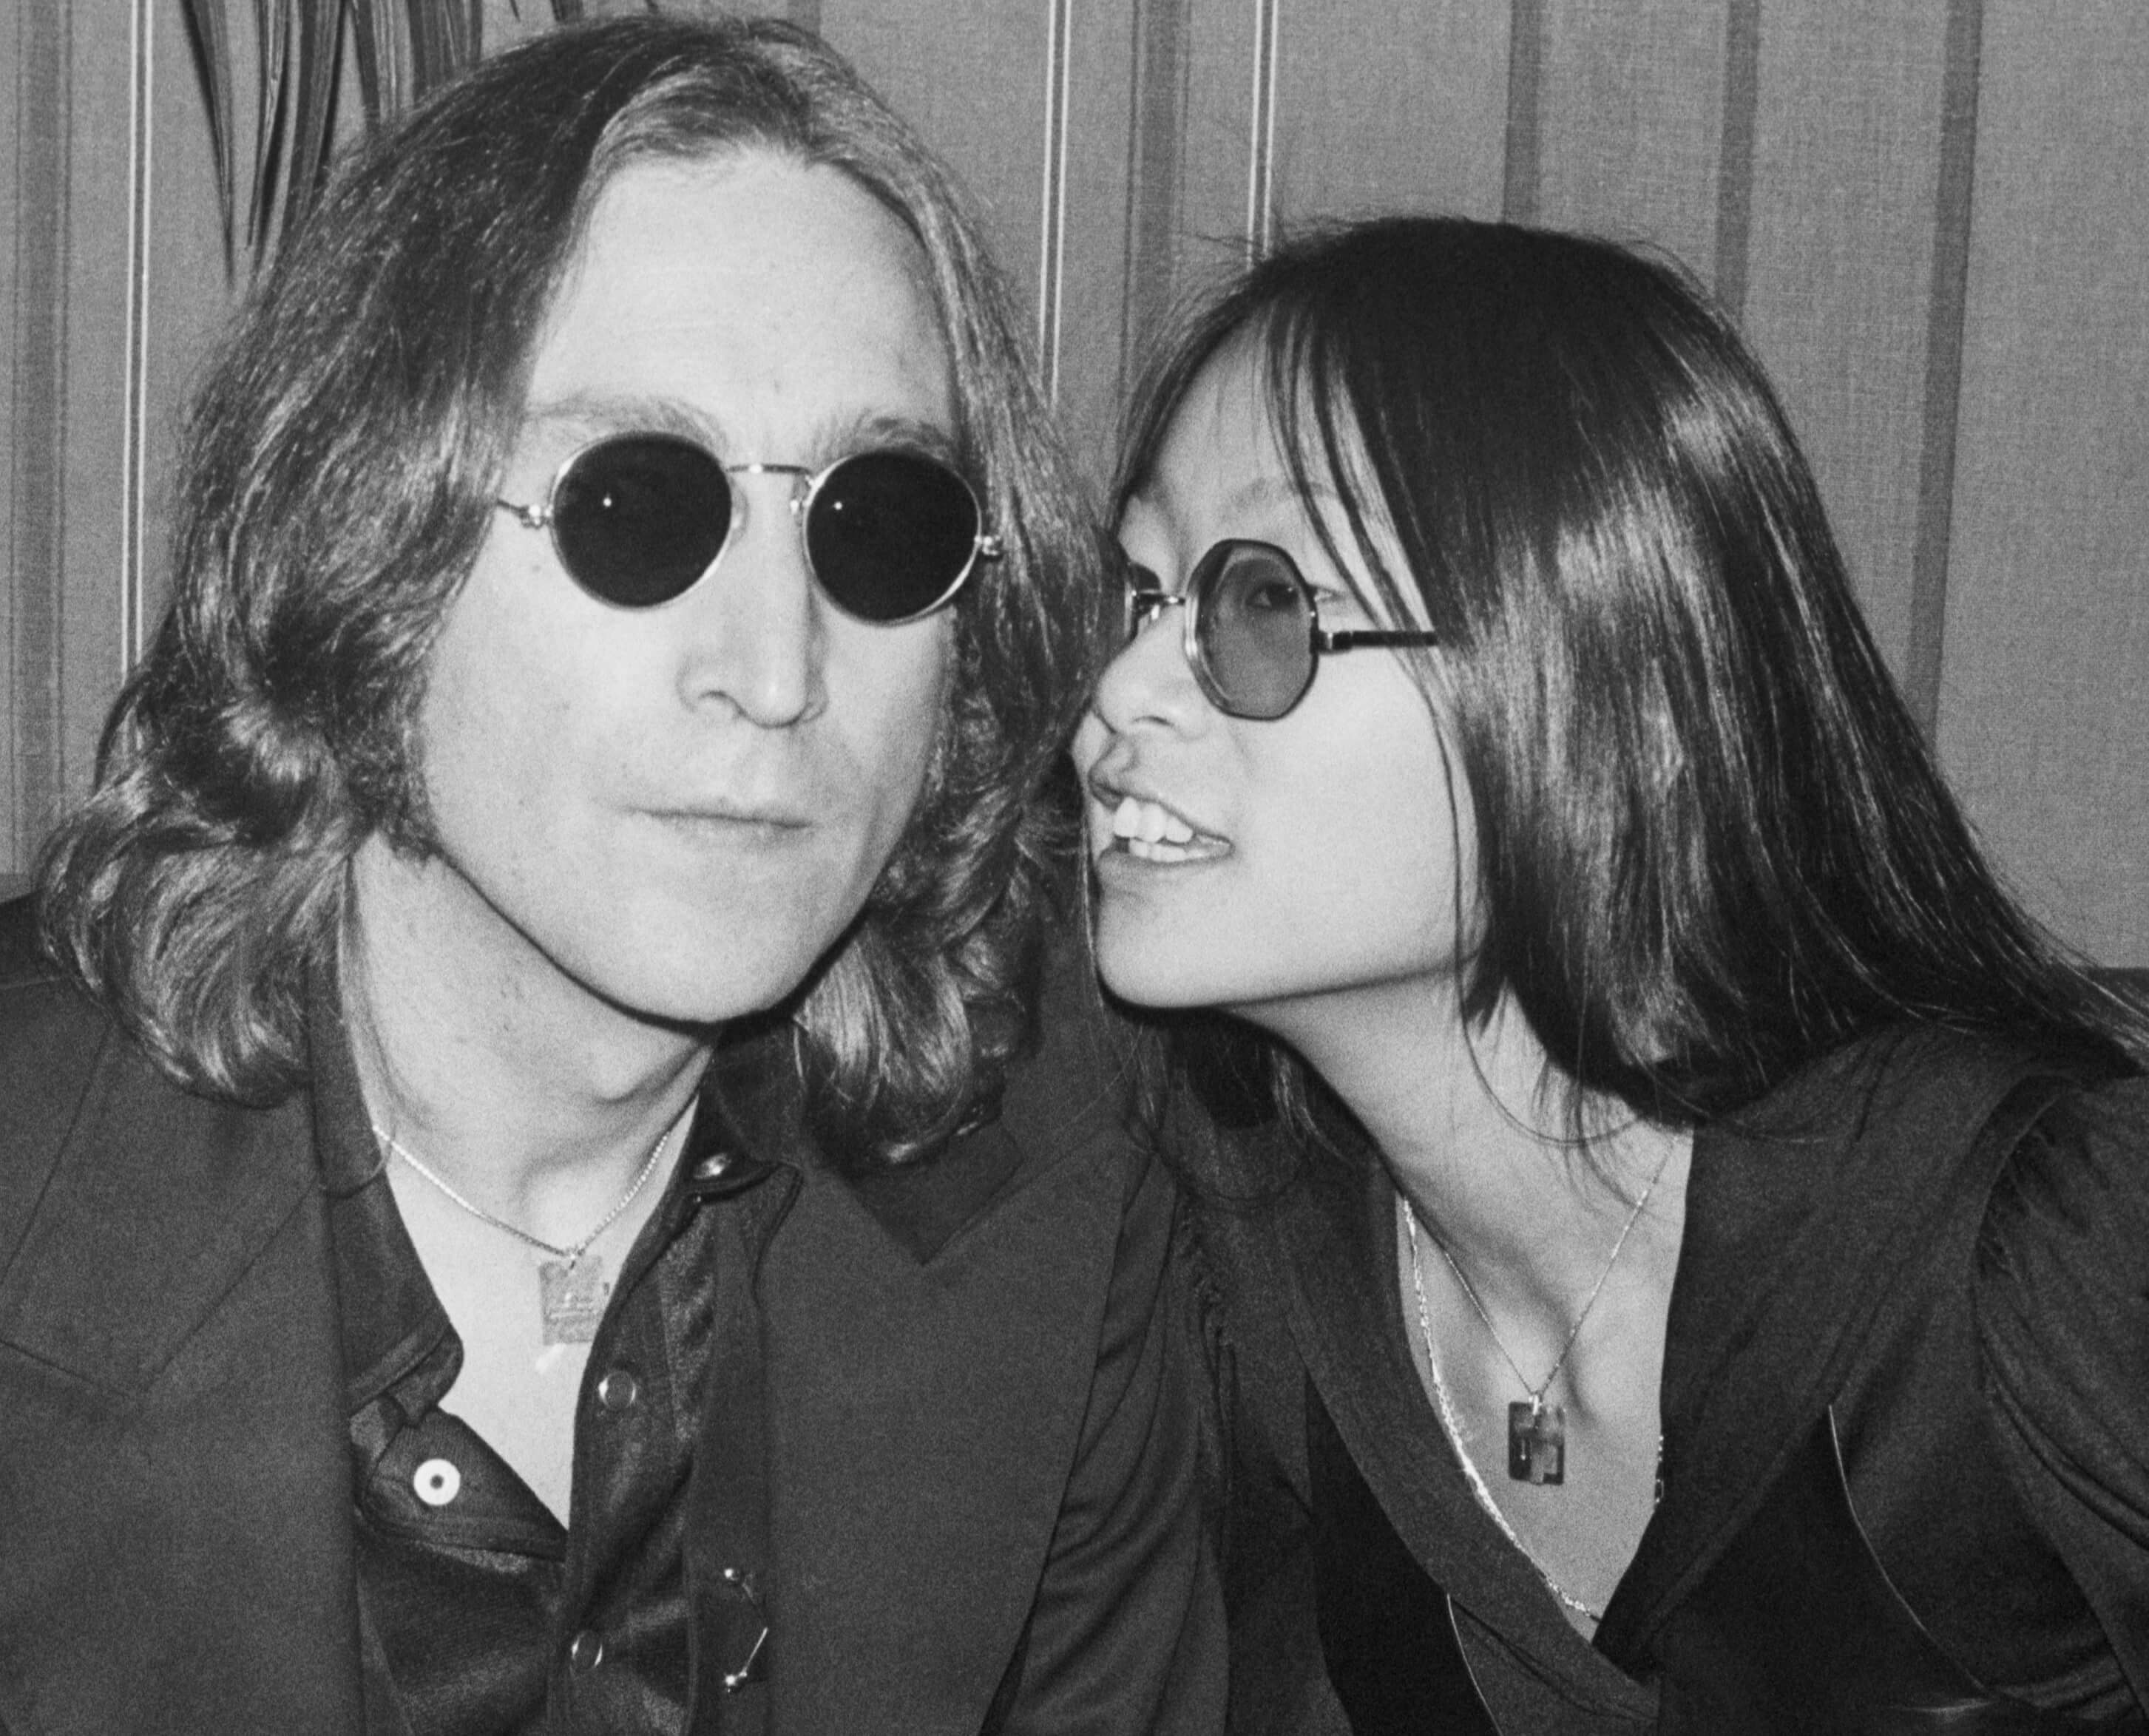 May Pang Said John Lennon Dreamed Up '#9 Dream' In Their Bed